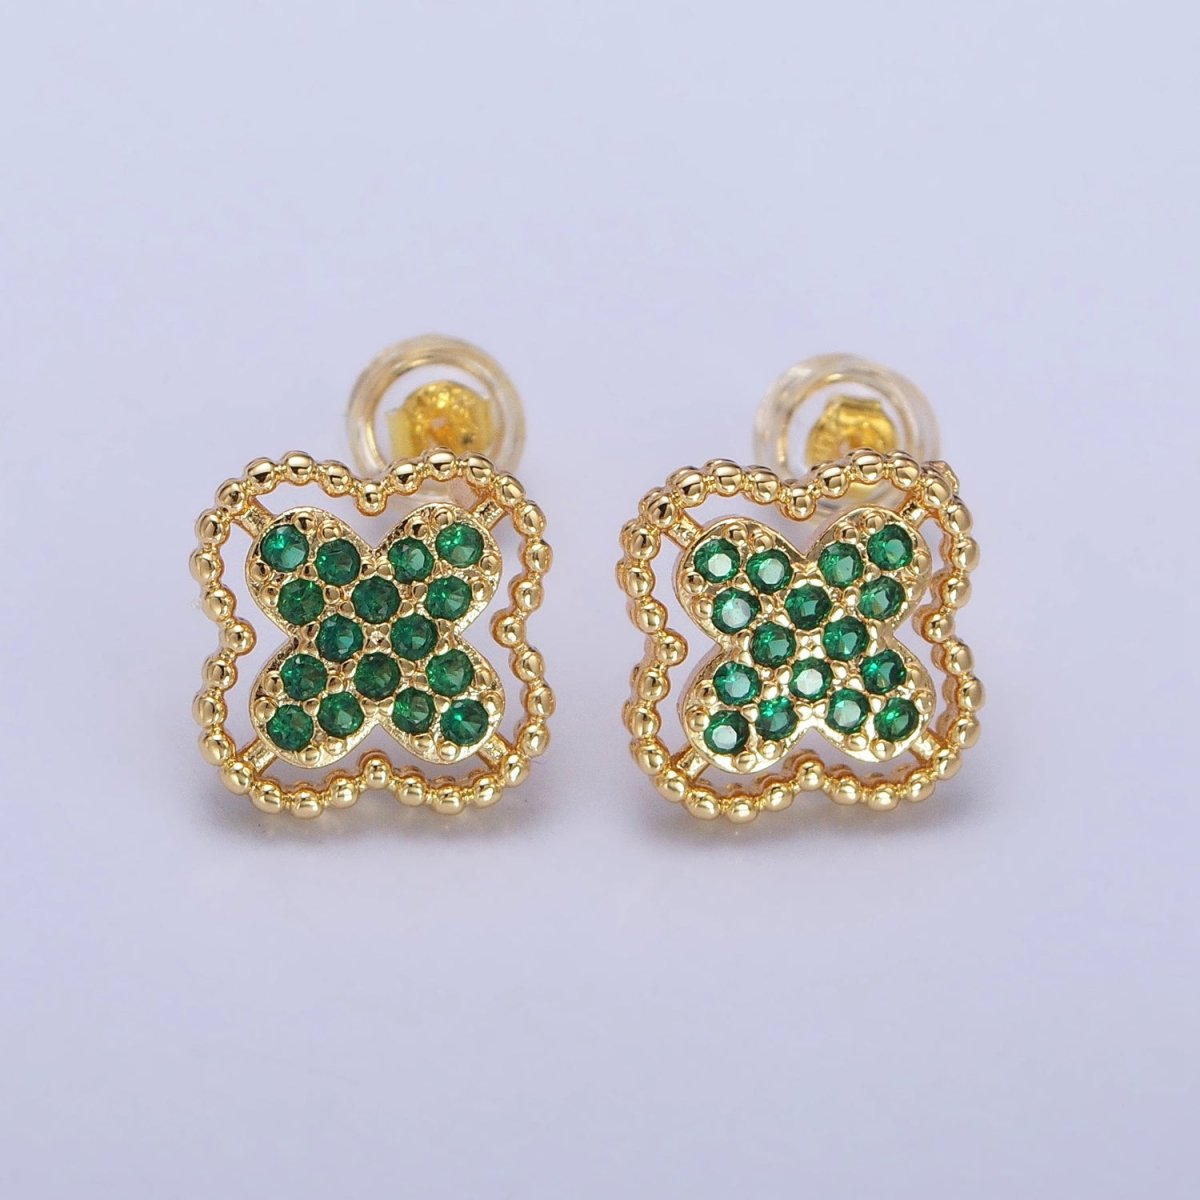 Green, Clear, Pink Micro Paved CZ Beaded Quatrefoil Clover Stud Earrings in Gold & Silver | AB404 - AB409 - DLUXCA